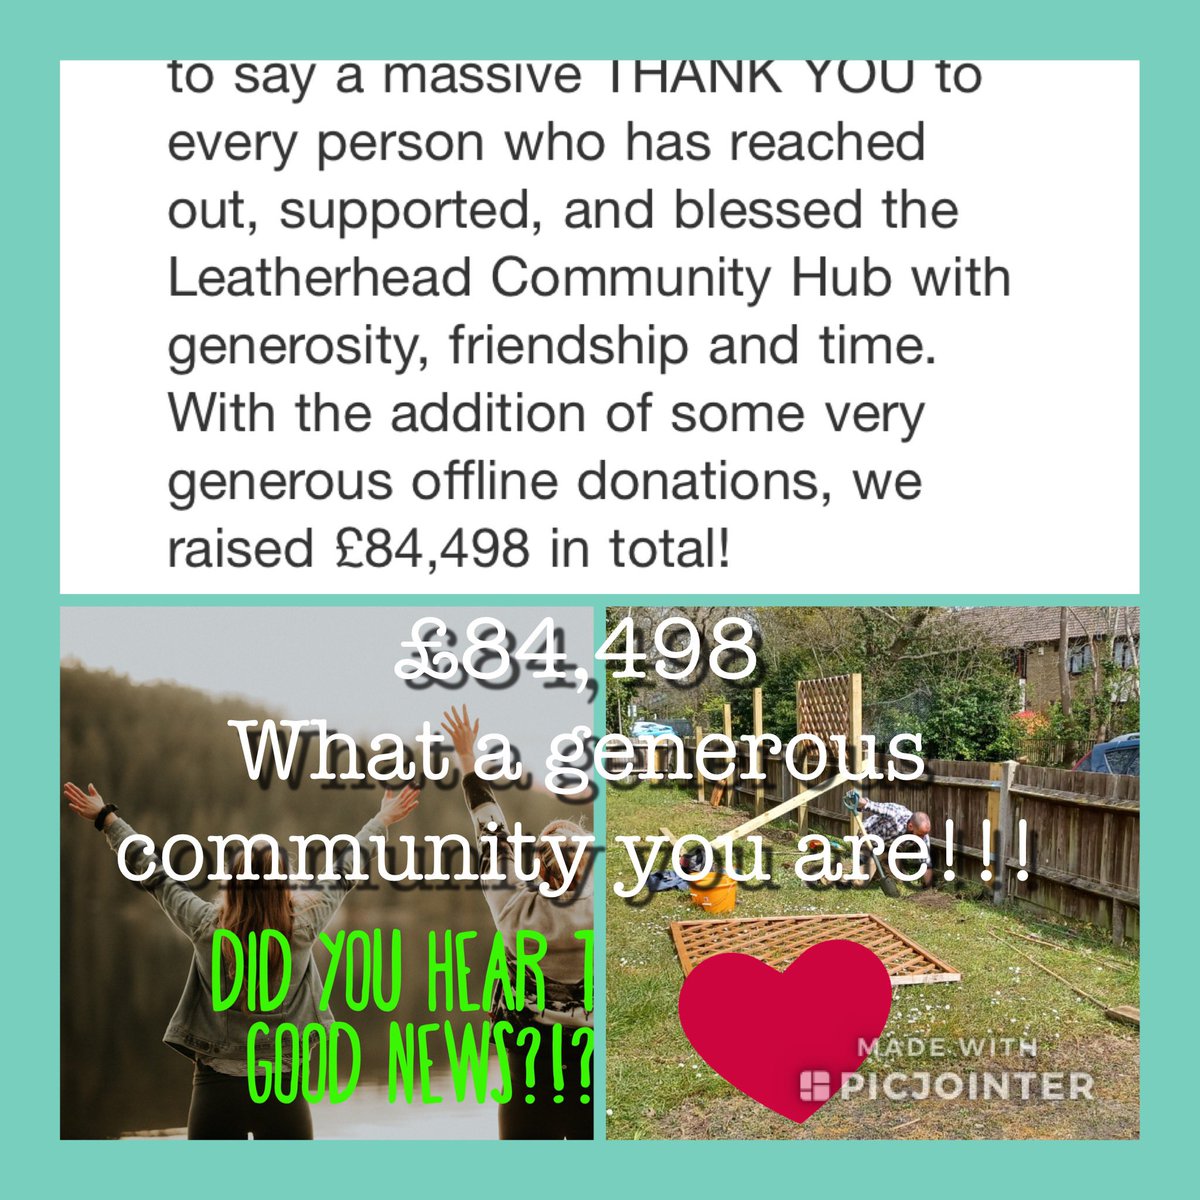 WOWZA you lot know how to give to your community!!!! Absolutely blown away & this means we are able to complete all the works & have a cafe / events manager in a year post!! #thankyou #grateful #everydonationcounts #unbelievablykind #cantwaittomeetyou #shareshareshare #whoopwhoop